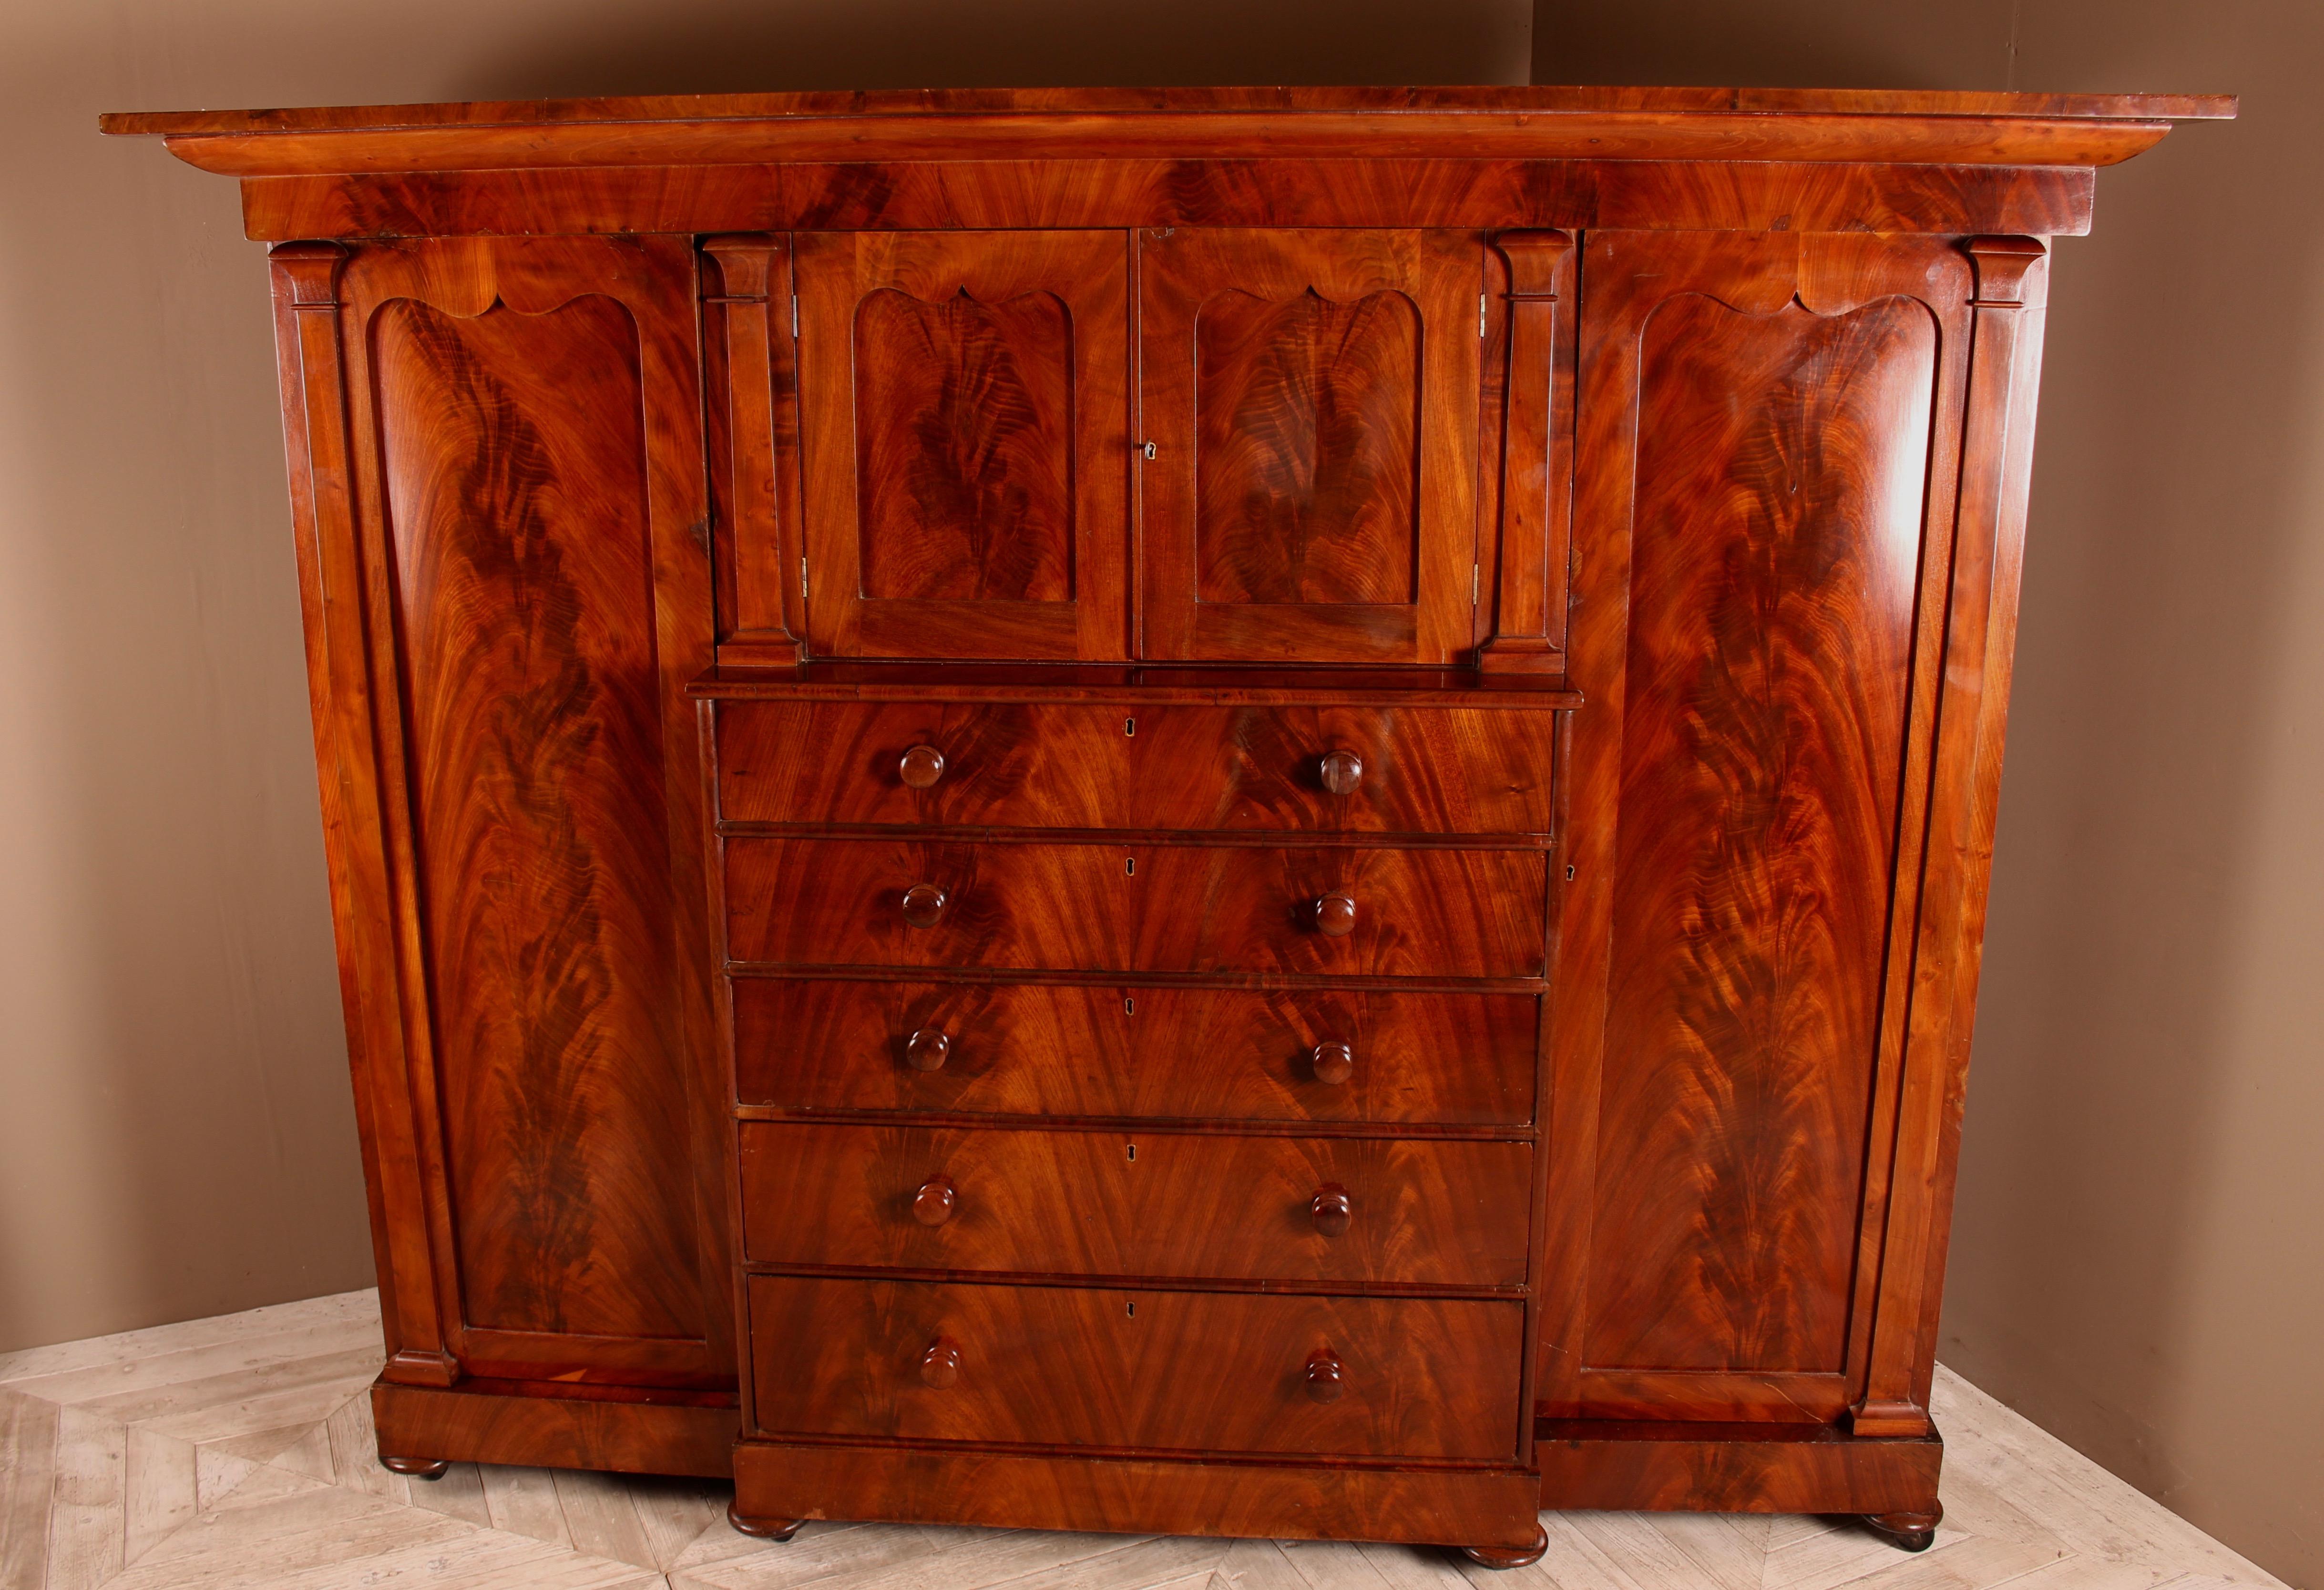 A handsome large Victorian flamed mahogany Compactum wardrobe of breakfront form. Having an attractive flared cushion pediment above a central shelved cupboard with five graduated drawers below. Flanked to either side with wardrobes with outer